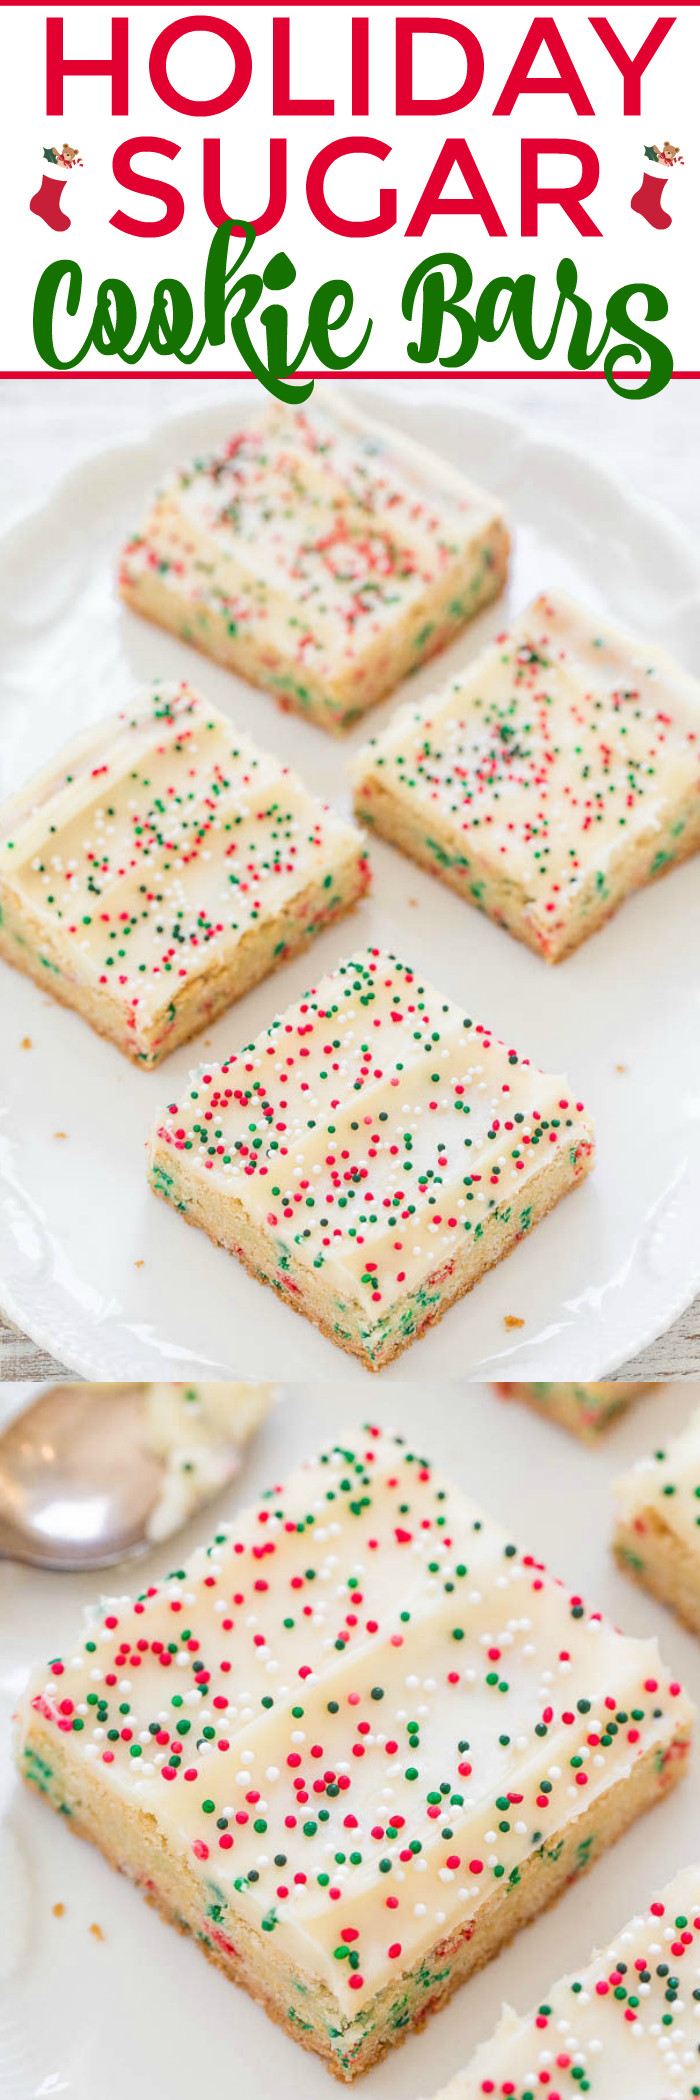 Christmas Bar Cookies
 Holiday Sugar Cookie Bars with Cream Cheese Frosting